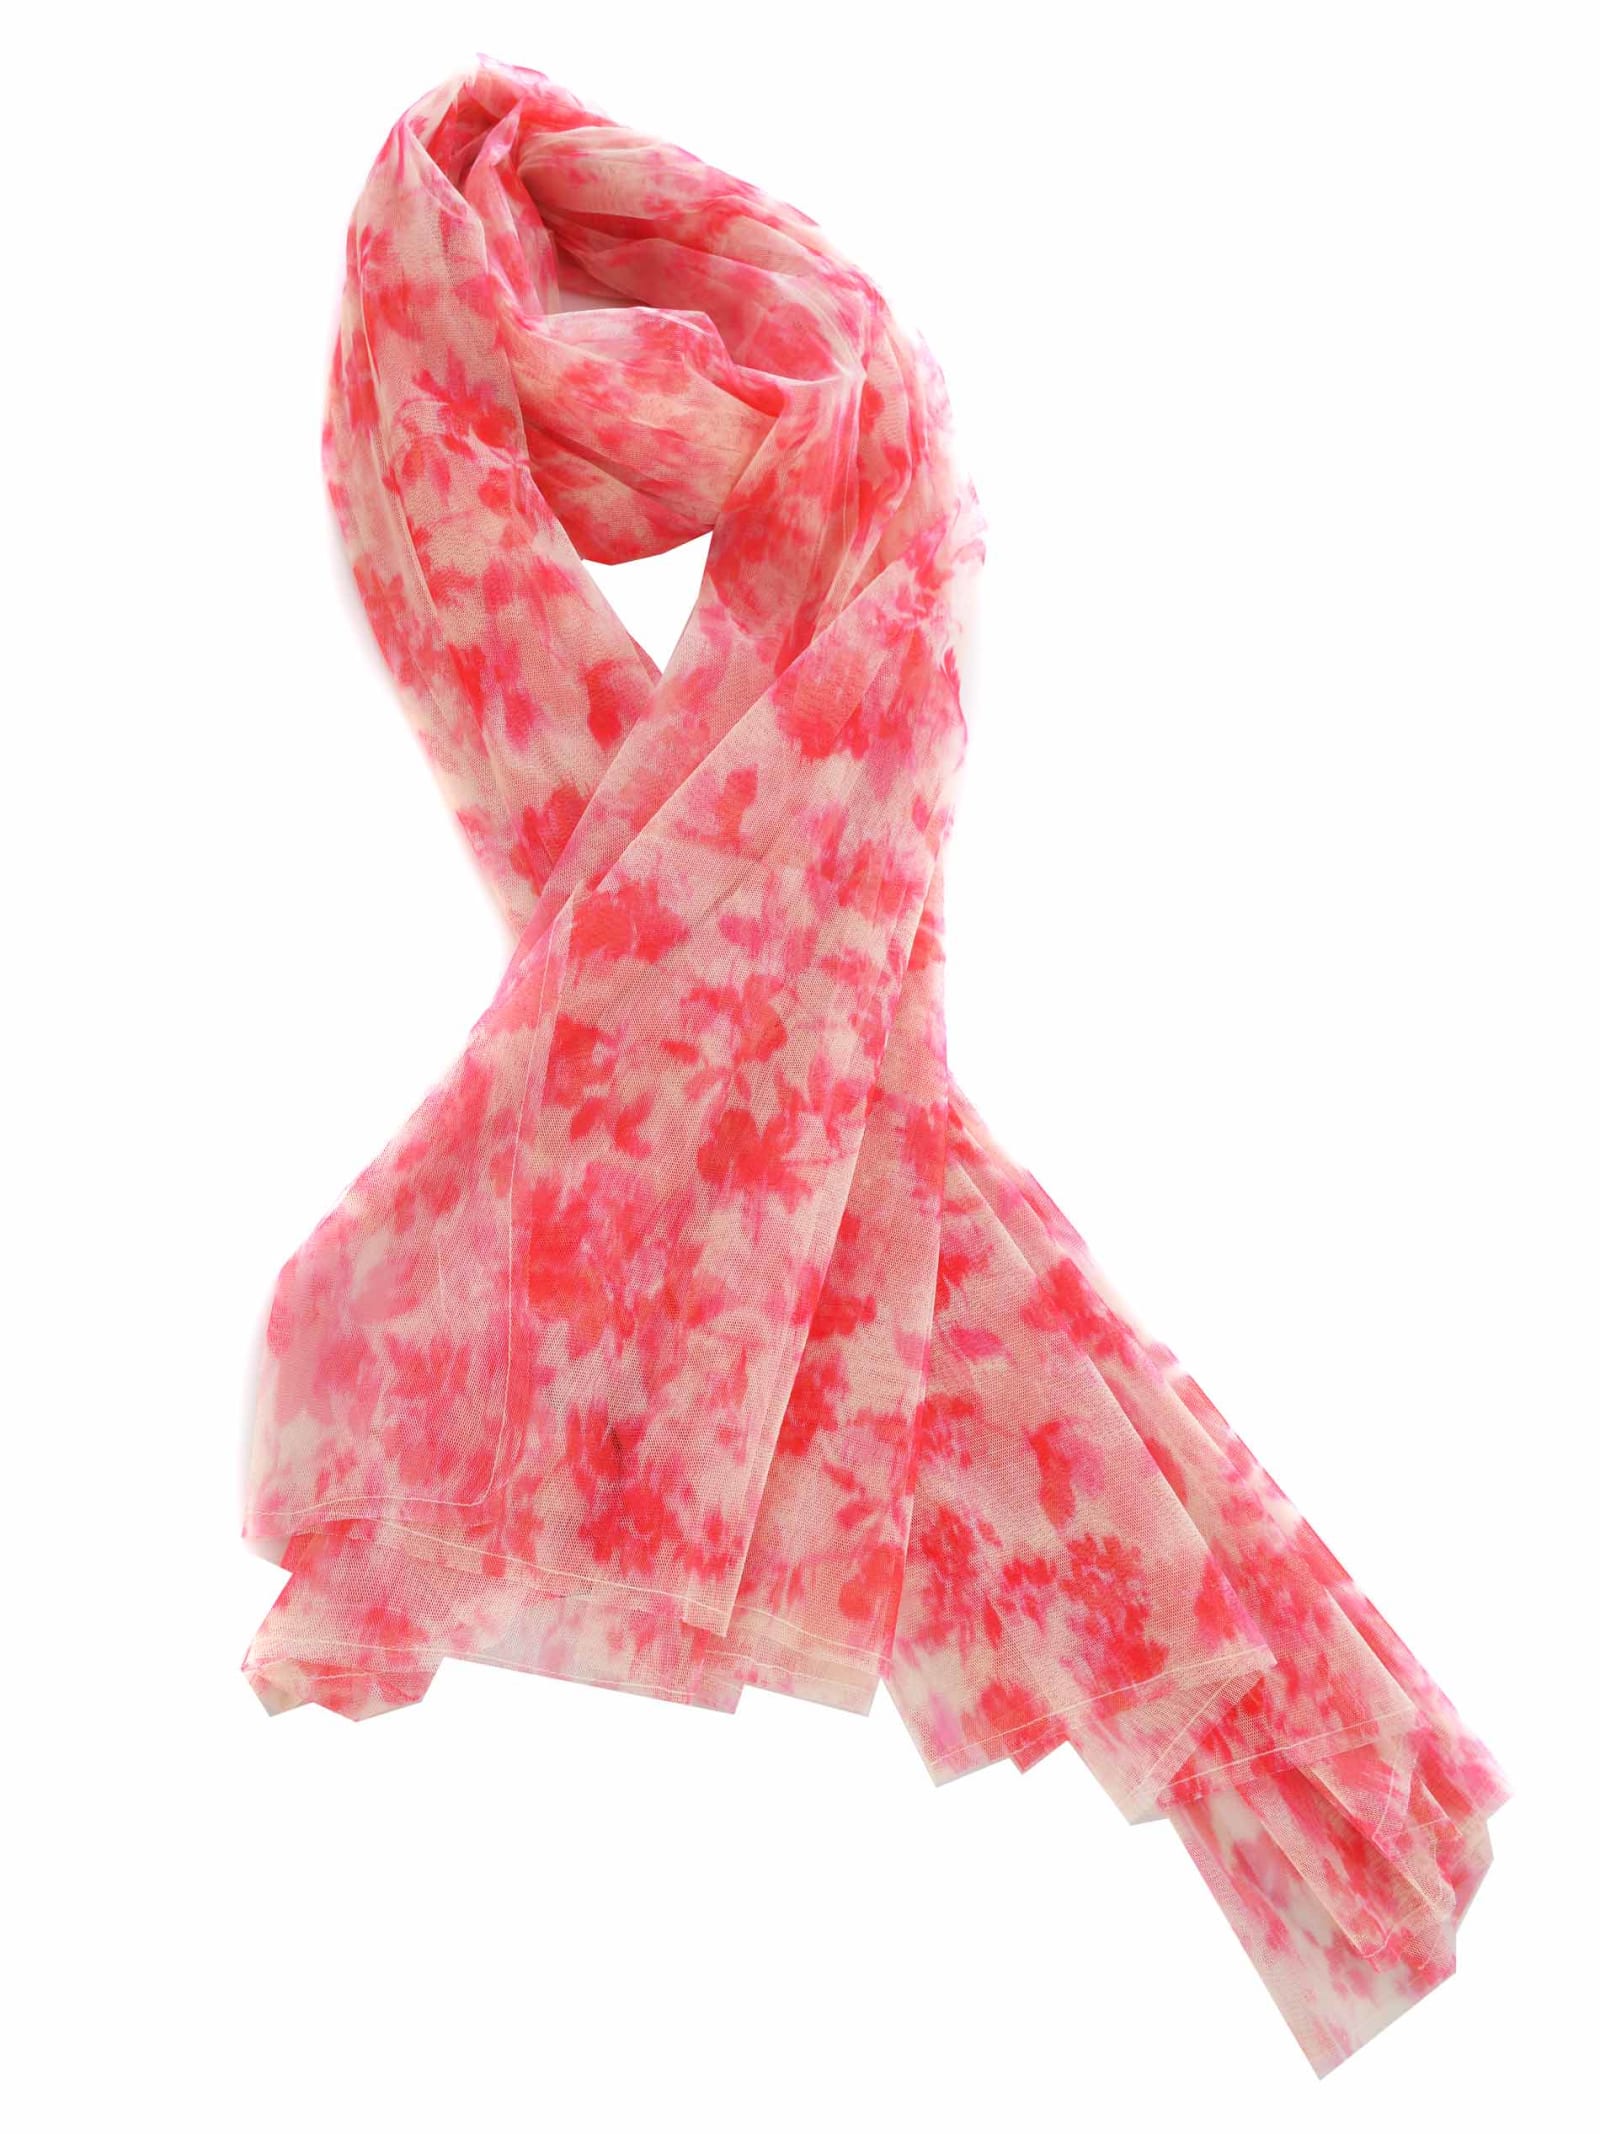 Scarf Philosophy Di Lorenzo Serafini abstract Made Of Tulle